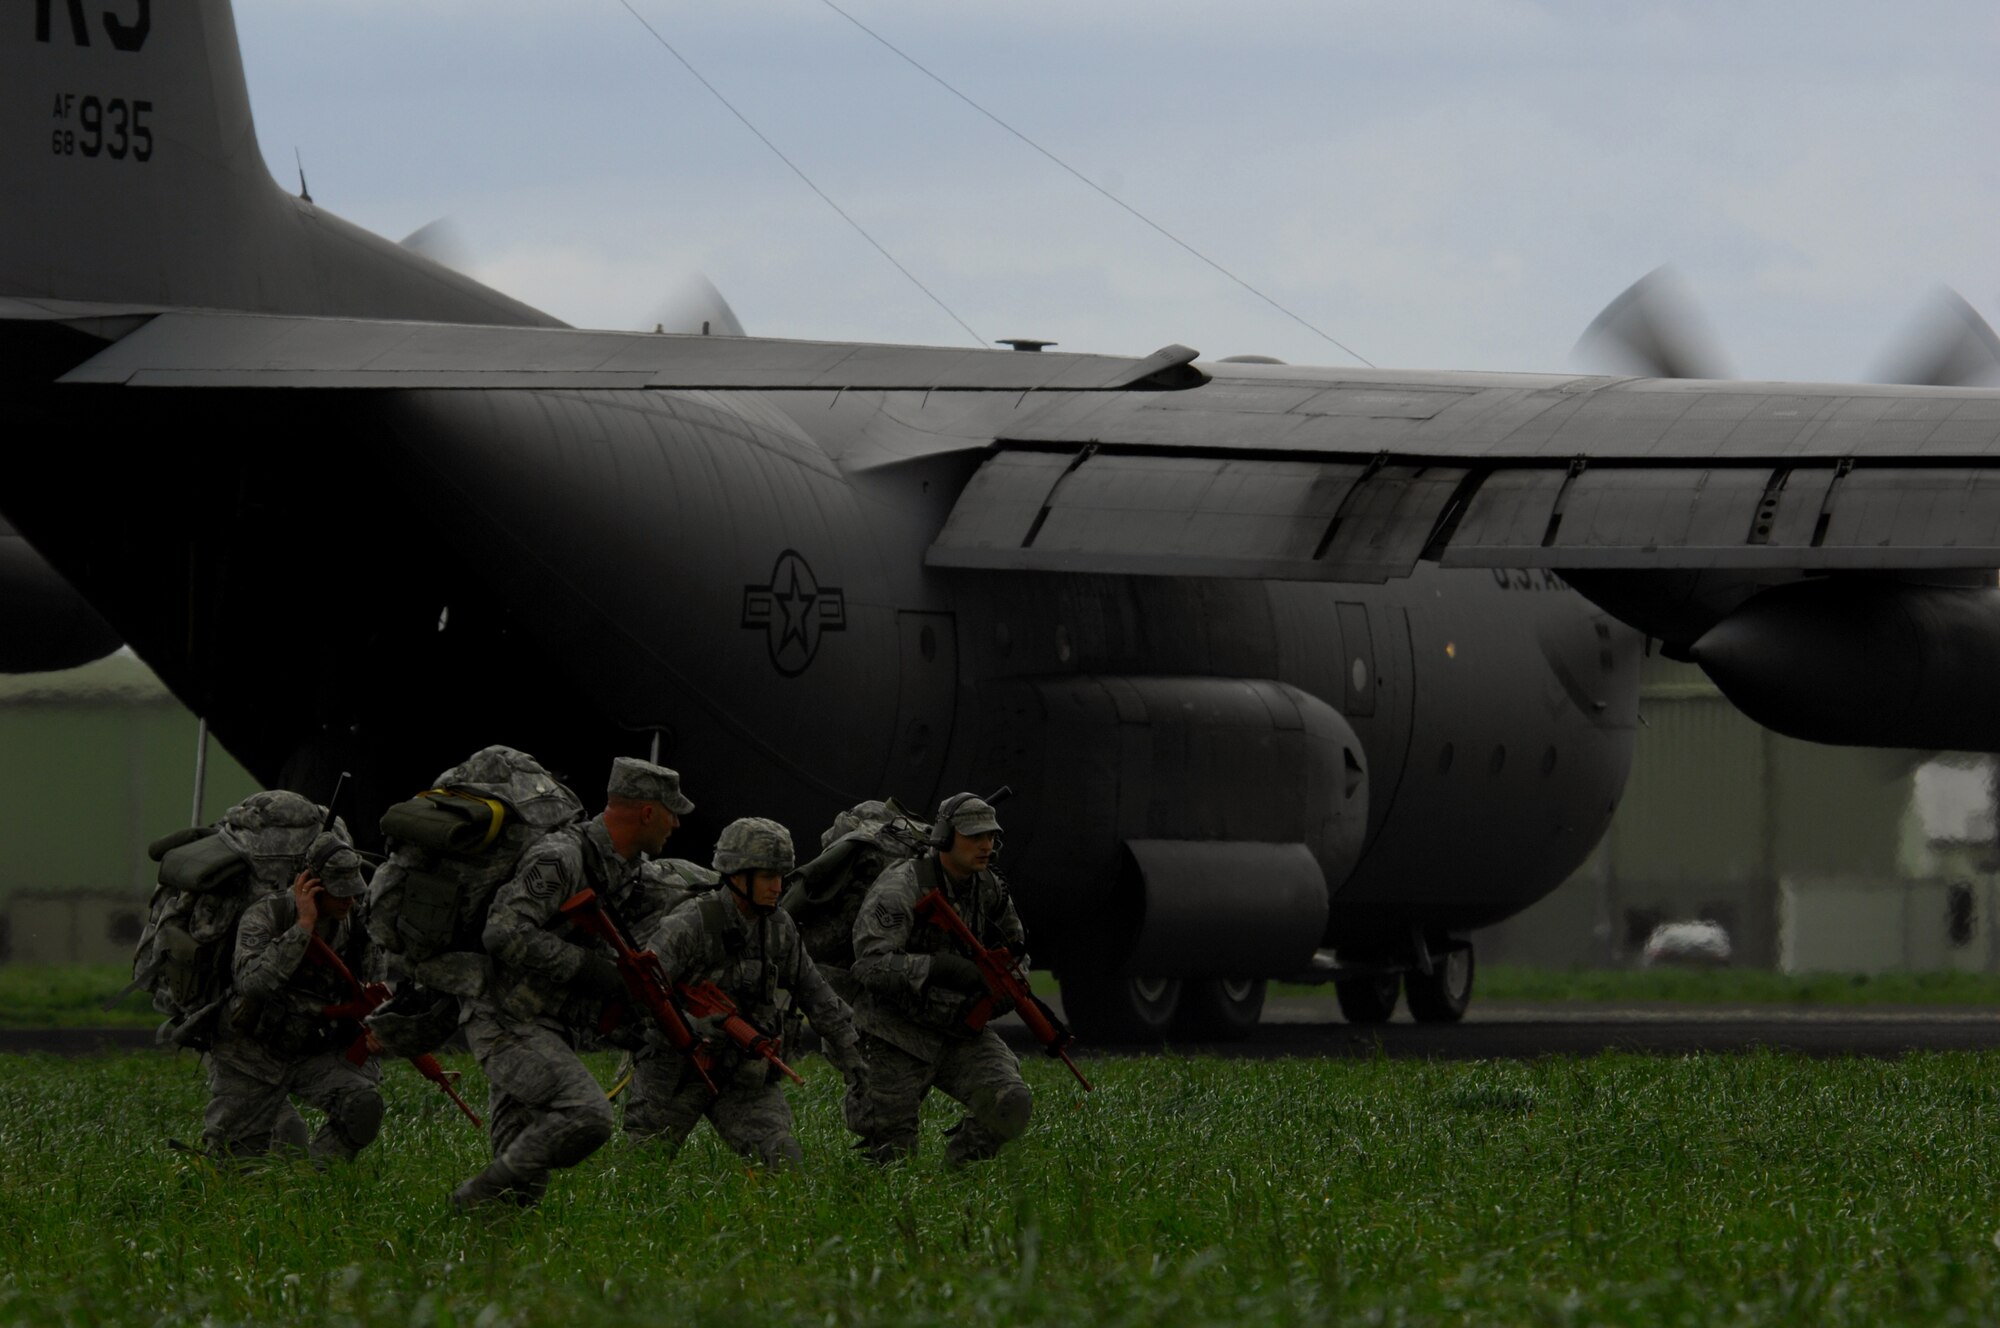 United States Air Force airmen with the 86th Contingency Response Group, rapidly deploy from a C-130 Hercules to begin assessing an airfield during an Operational Readiness Exercise, May 18, 2009, West Freugh Airfield, Scotland. (U.S. Air Force photo by Senior Airman Kenny Holston)